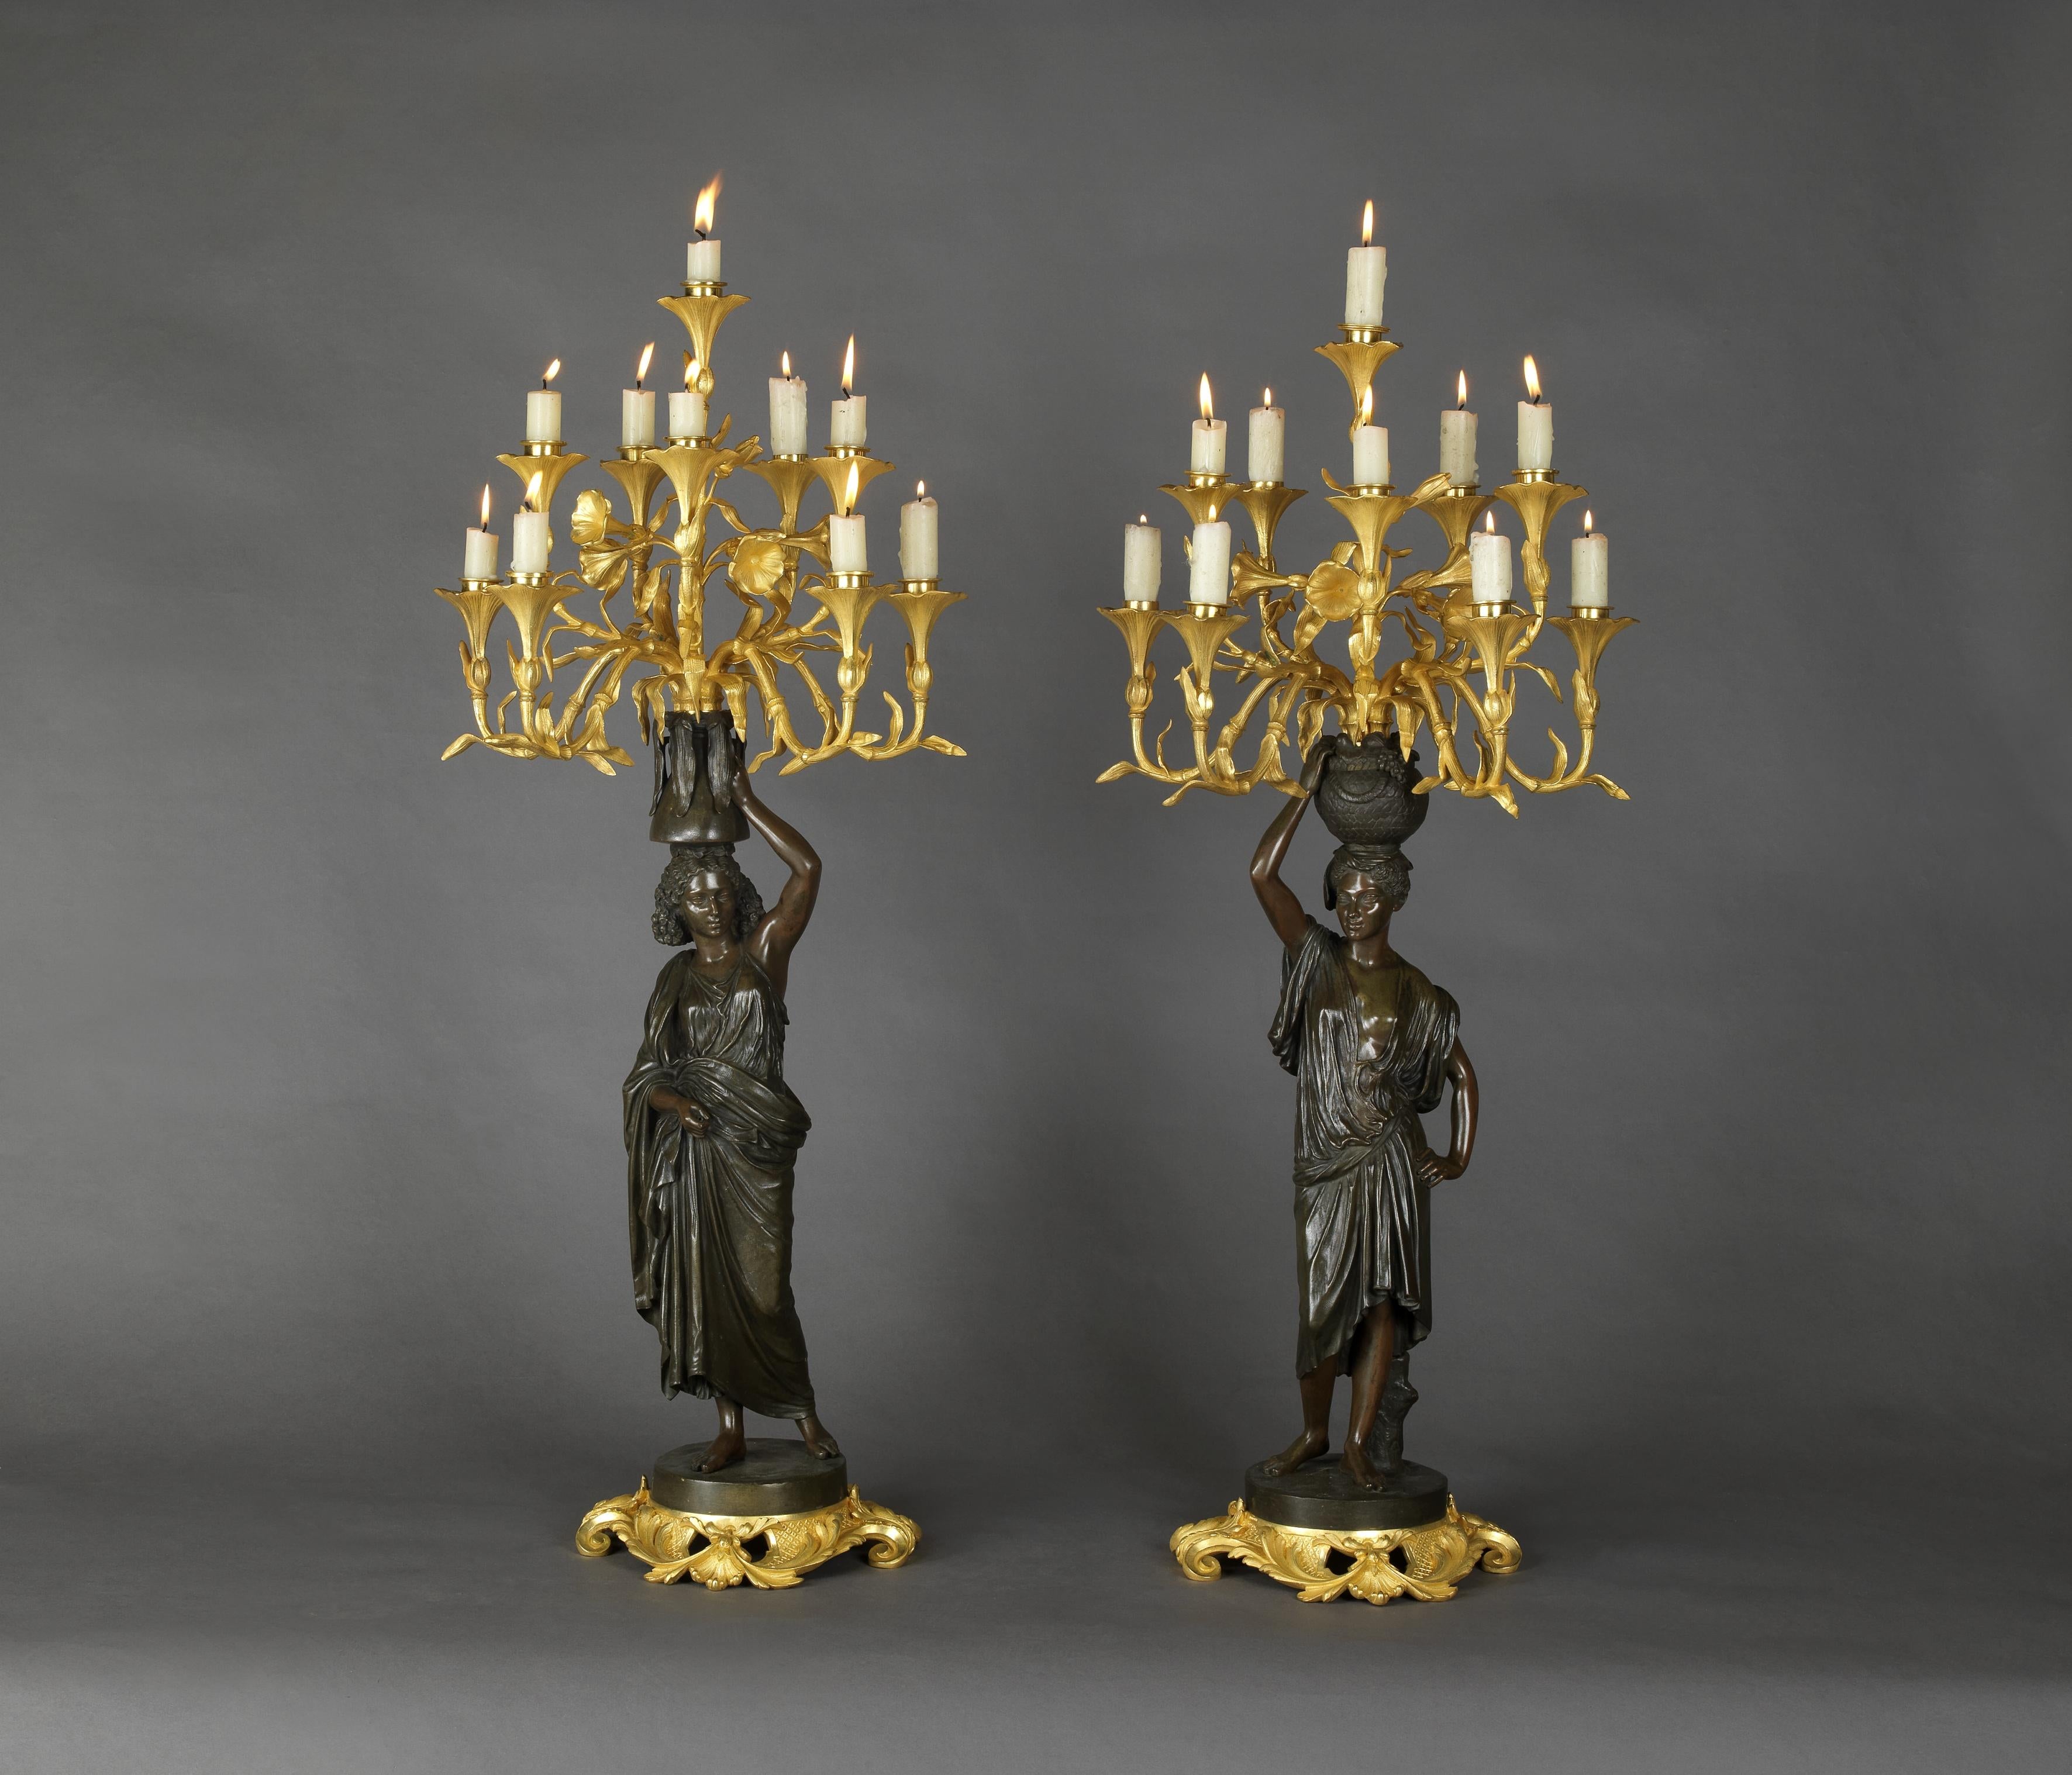 A pair of gilt and patinated bronze figural candelabra by Charles Cumberworth.

French, circa 1850. 

Signed 'C. Cumberworth'. 

This Fine pair of candelabra is finely modelled as a North African figures of a man and woman with flowing drapery